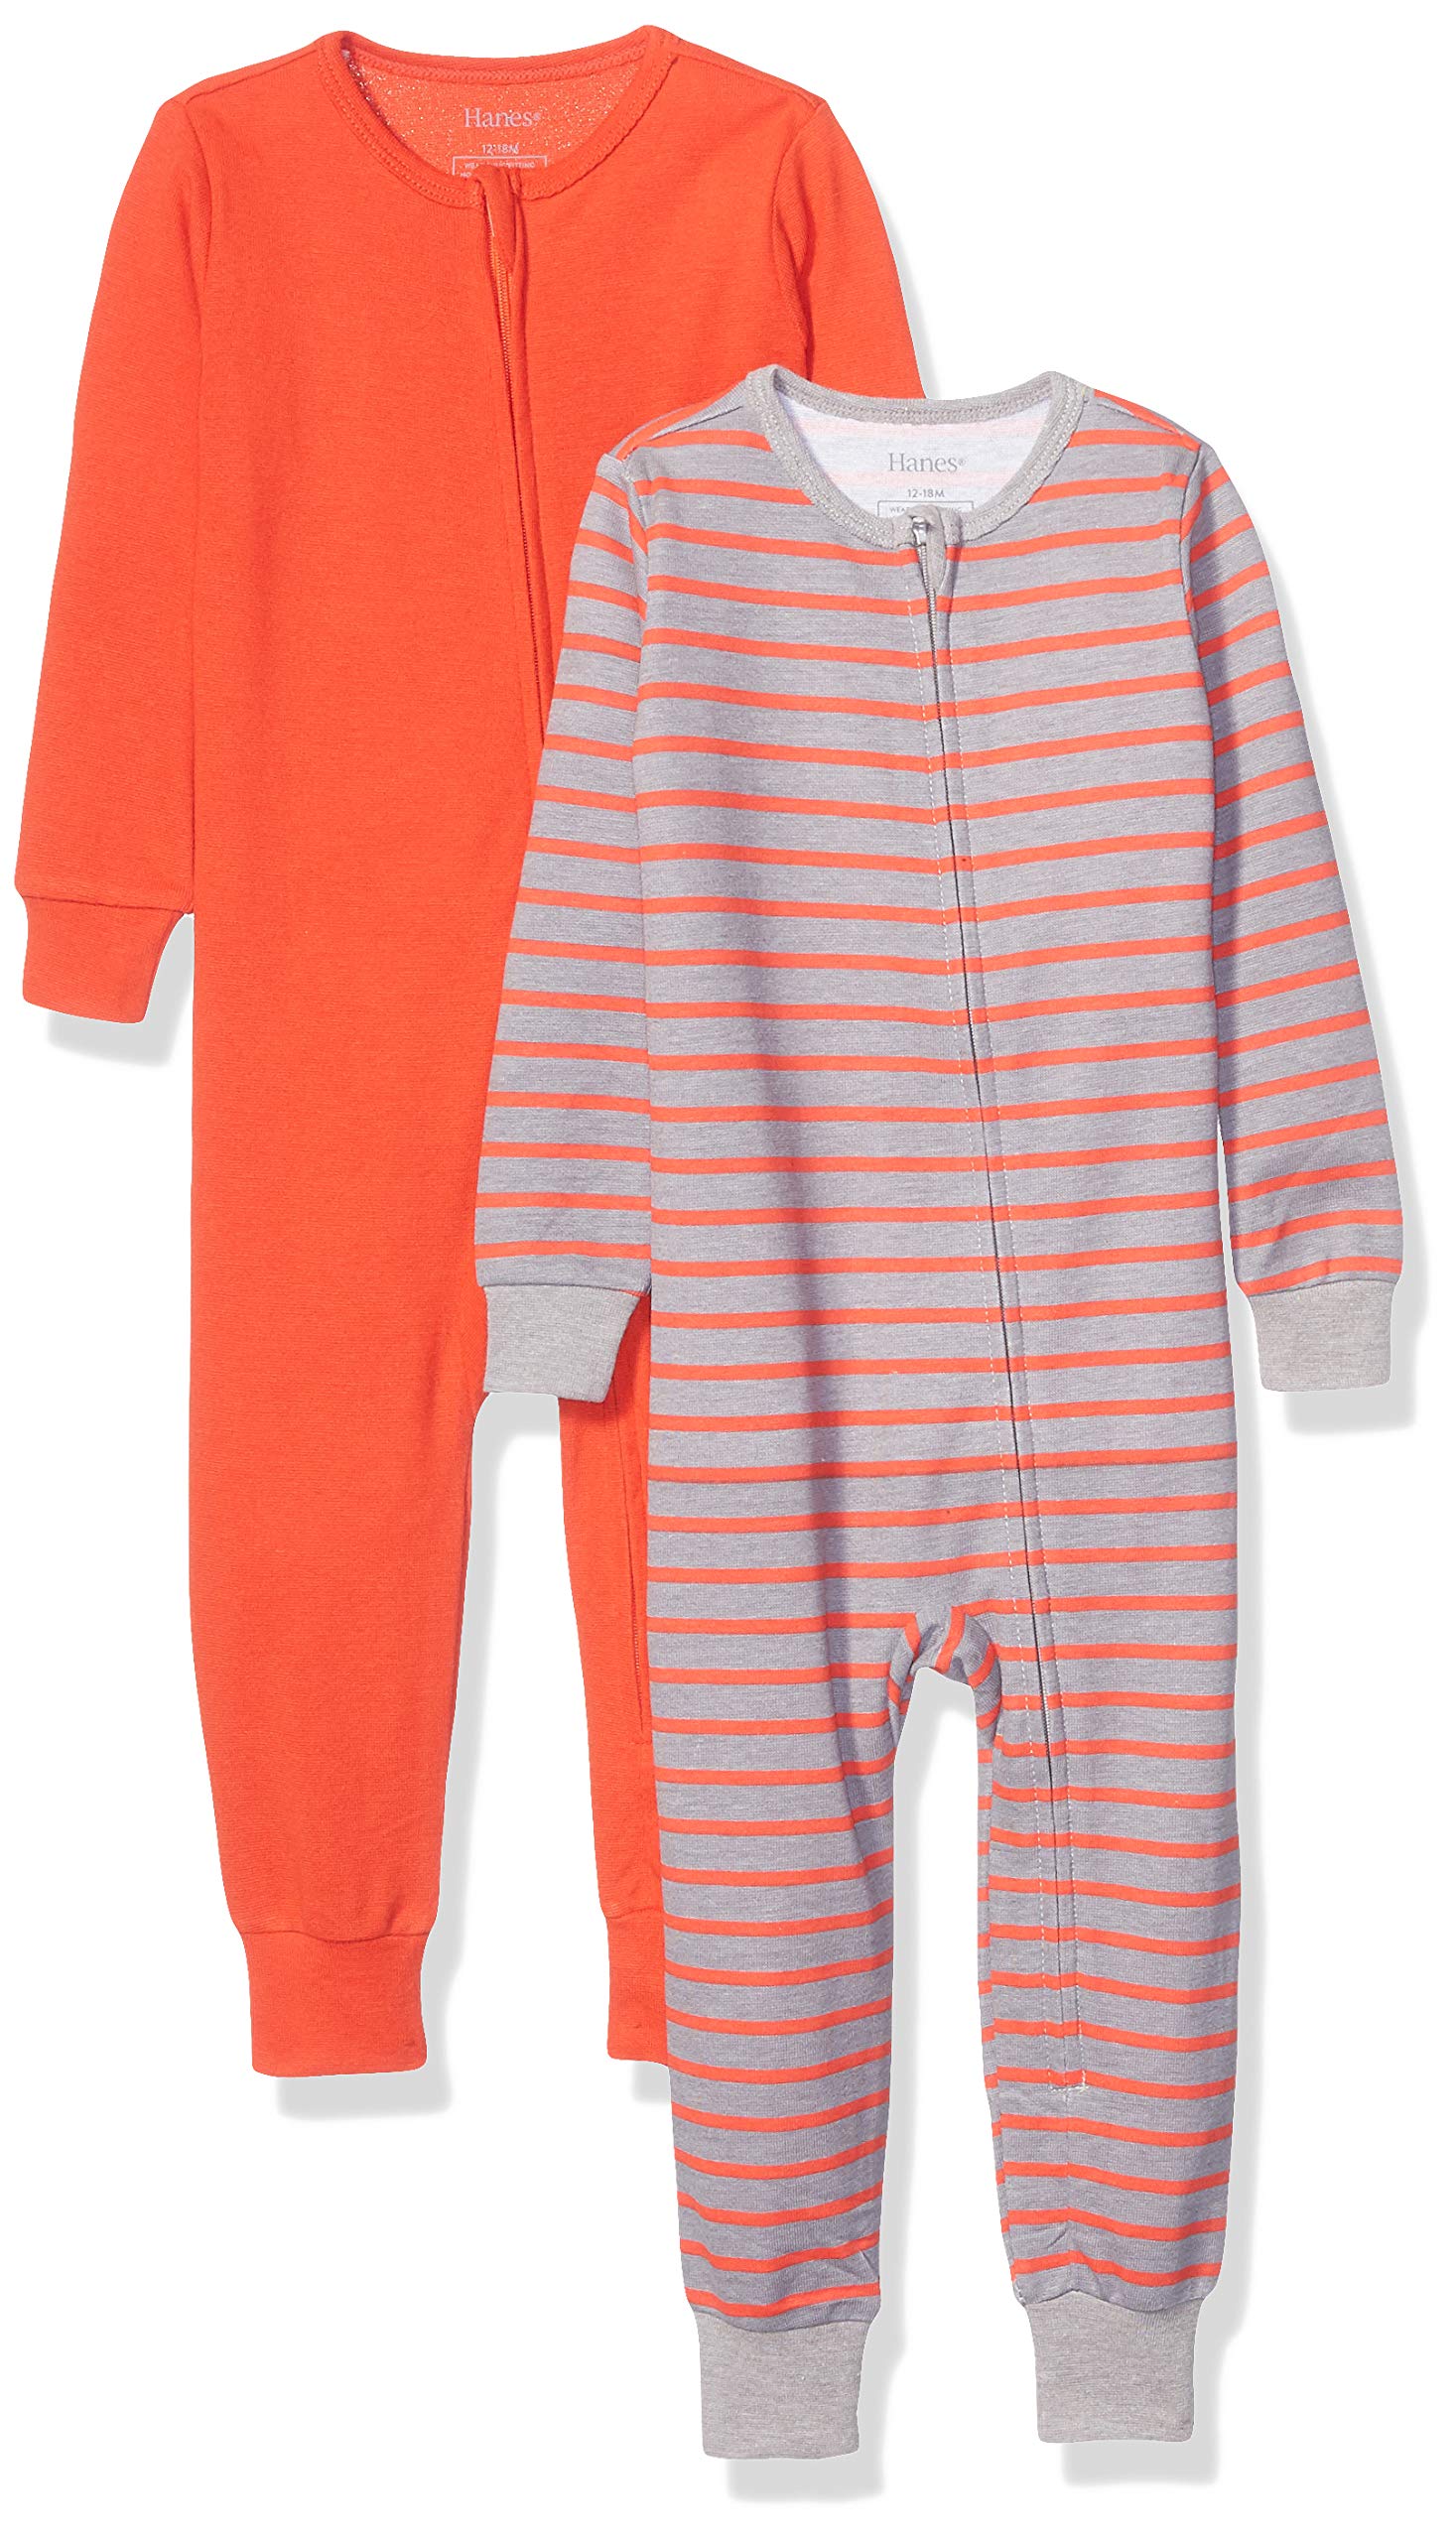 Hanes Baby Zip Up Pajamas, Ultimate Baby Zippin Sleep and Play Suits, 2 Pack